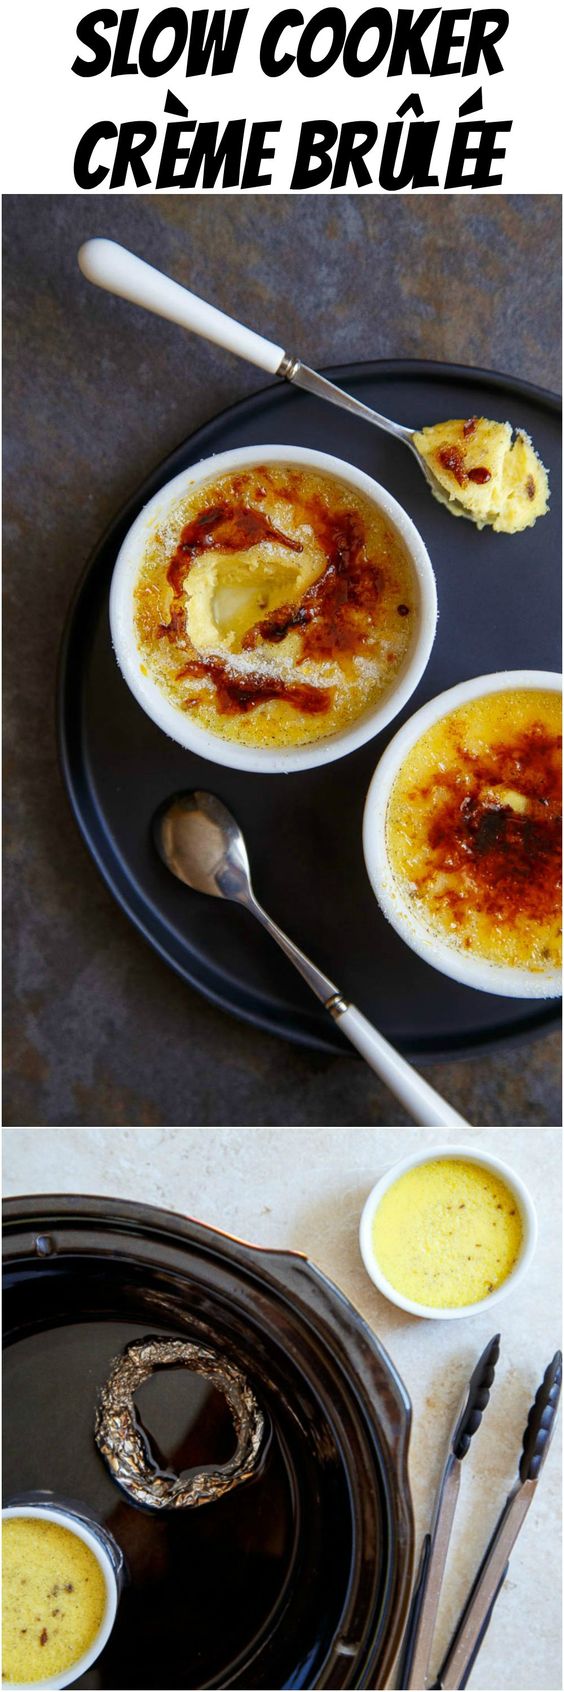 Slow cooker creme brulee made so easily! Crockpot creme brulee takes just 5 minutes of prep and 2 hours on low. No more guessing when creme brulee is done--this is too easy! #crockpot #slowcooker #crockpotdessert #slowcookerdessert #cremebrulee #burntsugar #cremecaramel #dessertfortwo #smallbatchdessert #romanticdessert